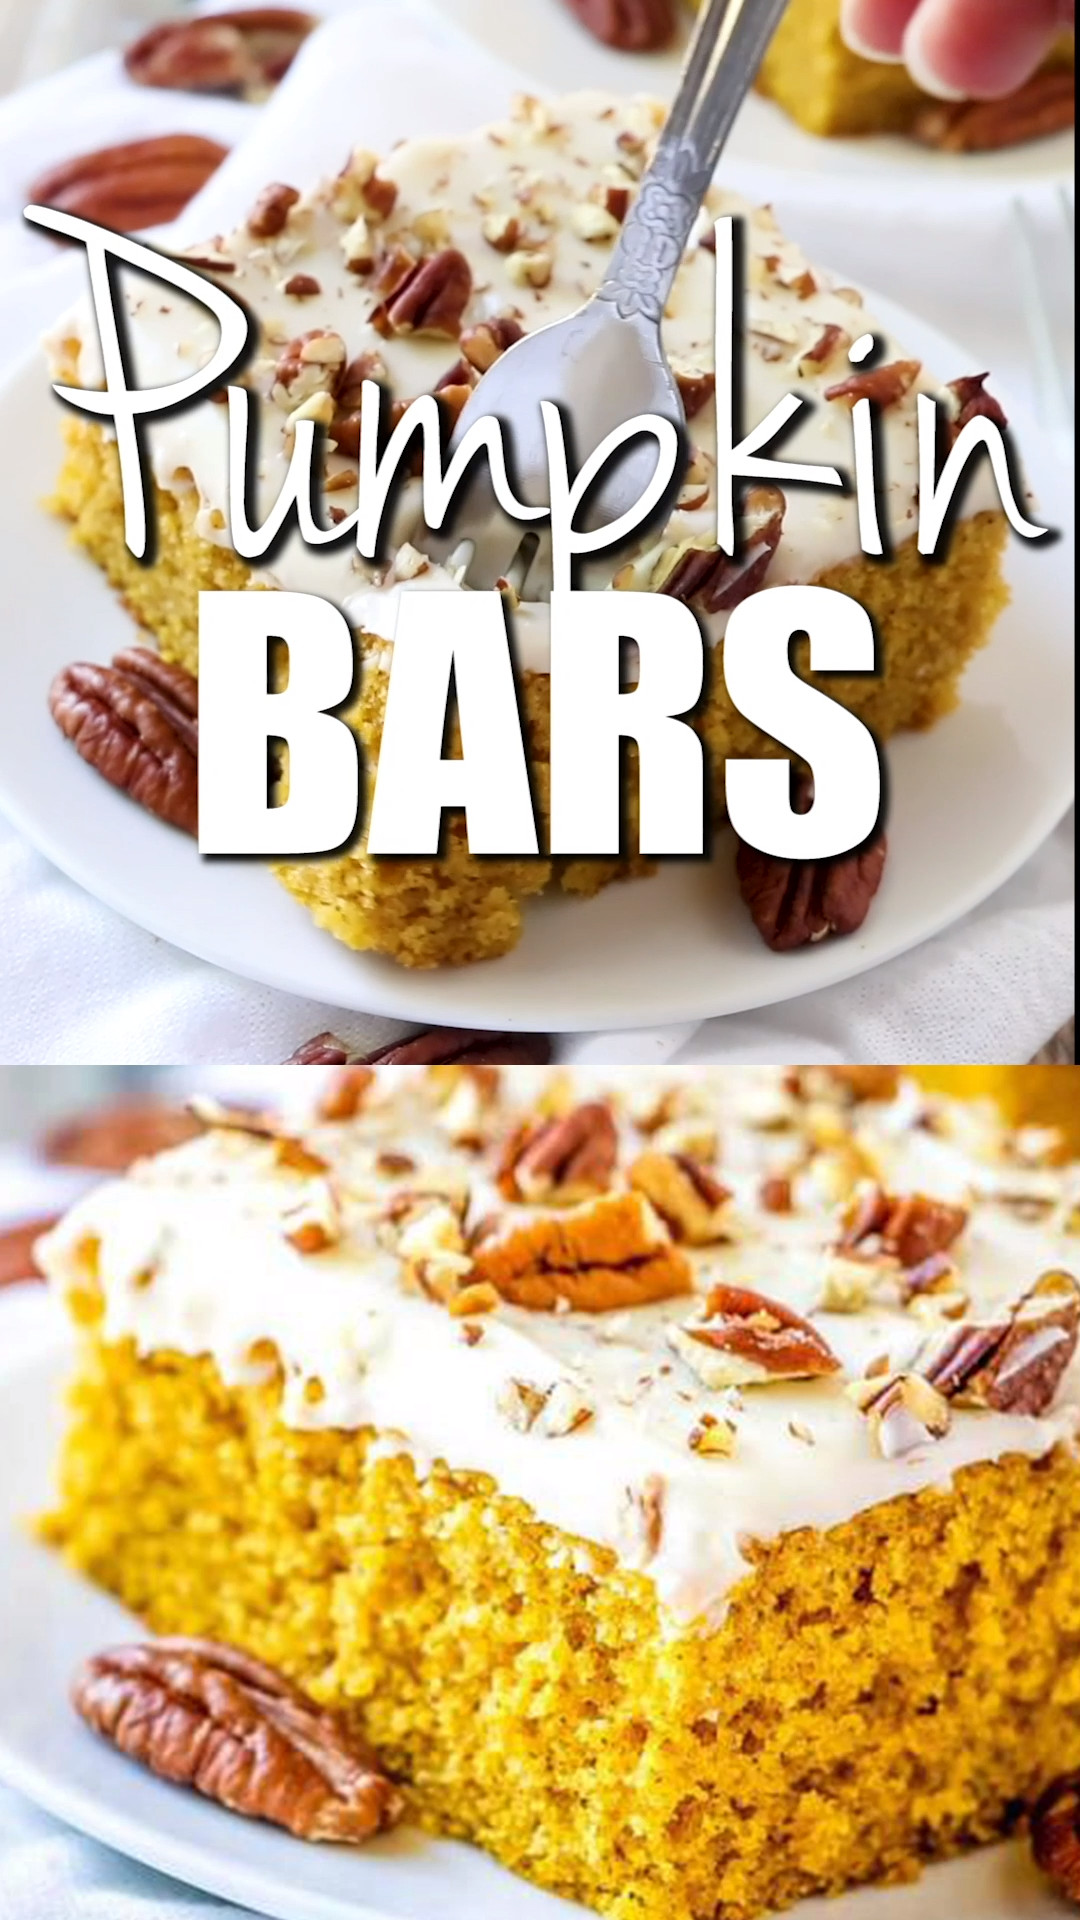 25 thanksgiving desserts for a crowd videos ideas